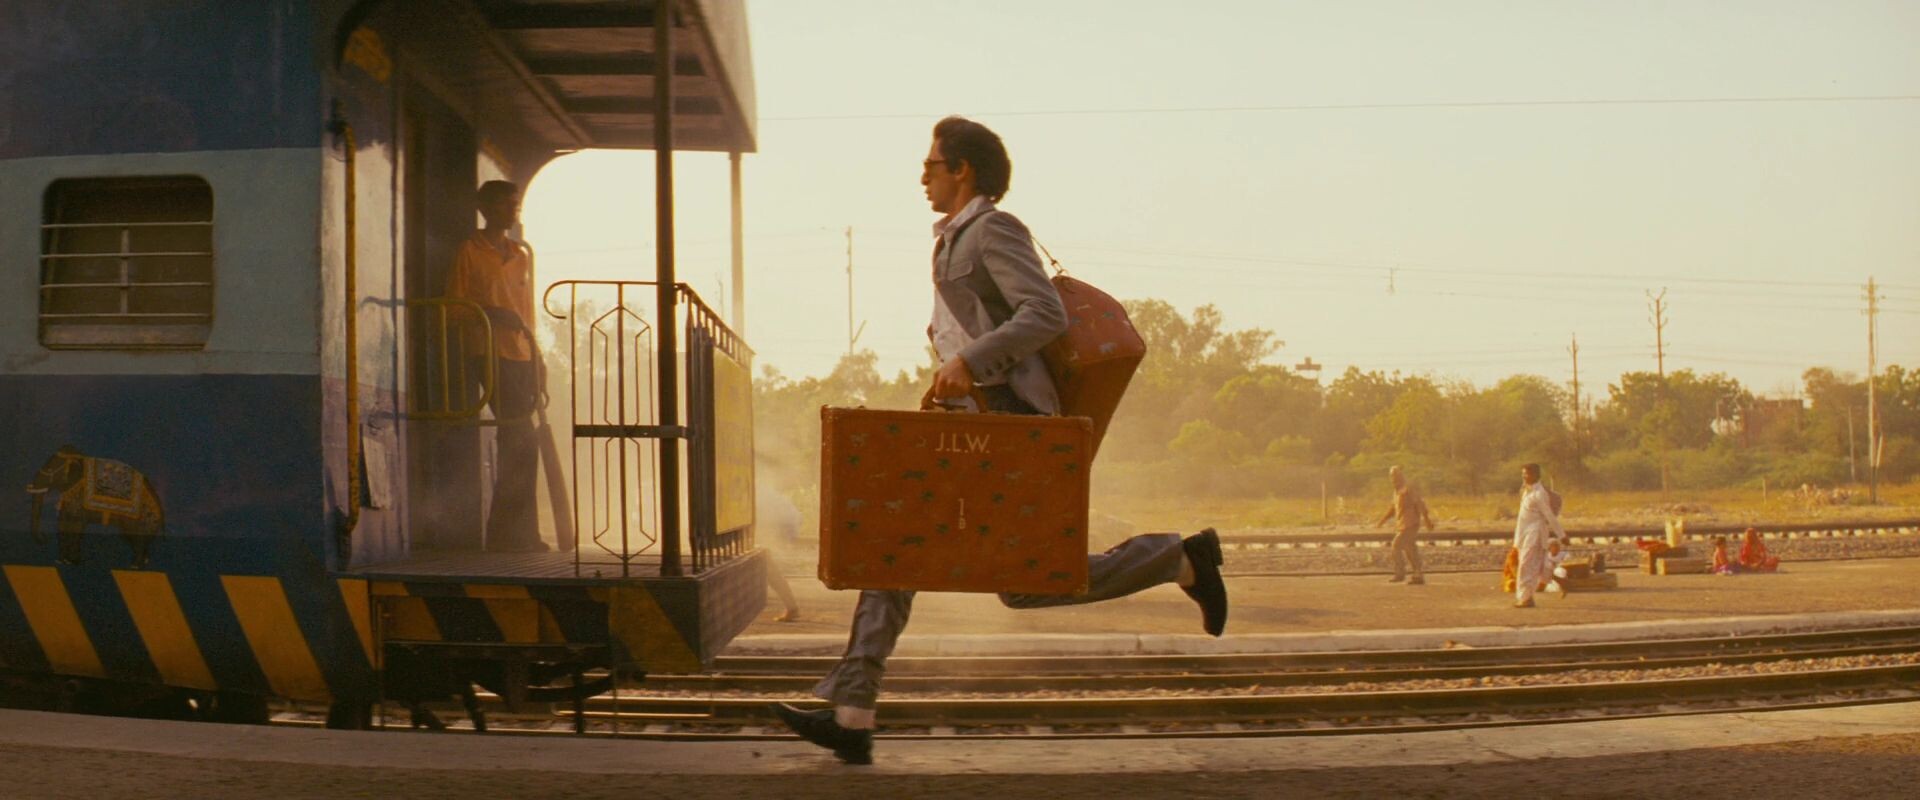 Darjeeling Limited' crammed with baggage, goes nowhere